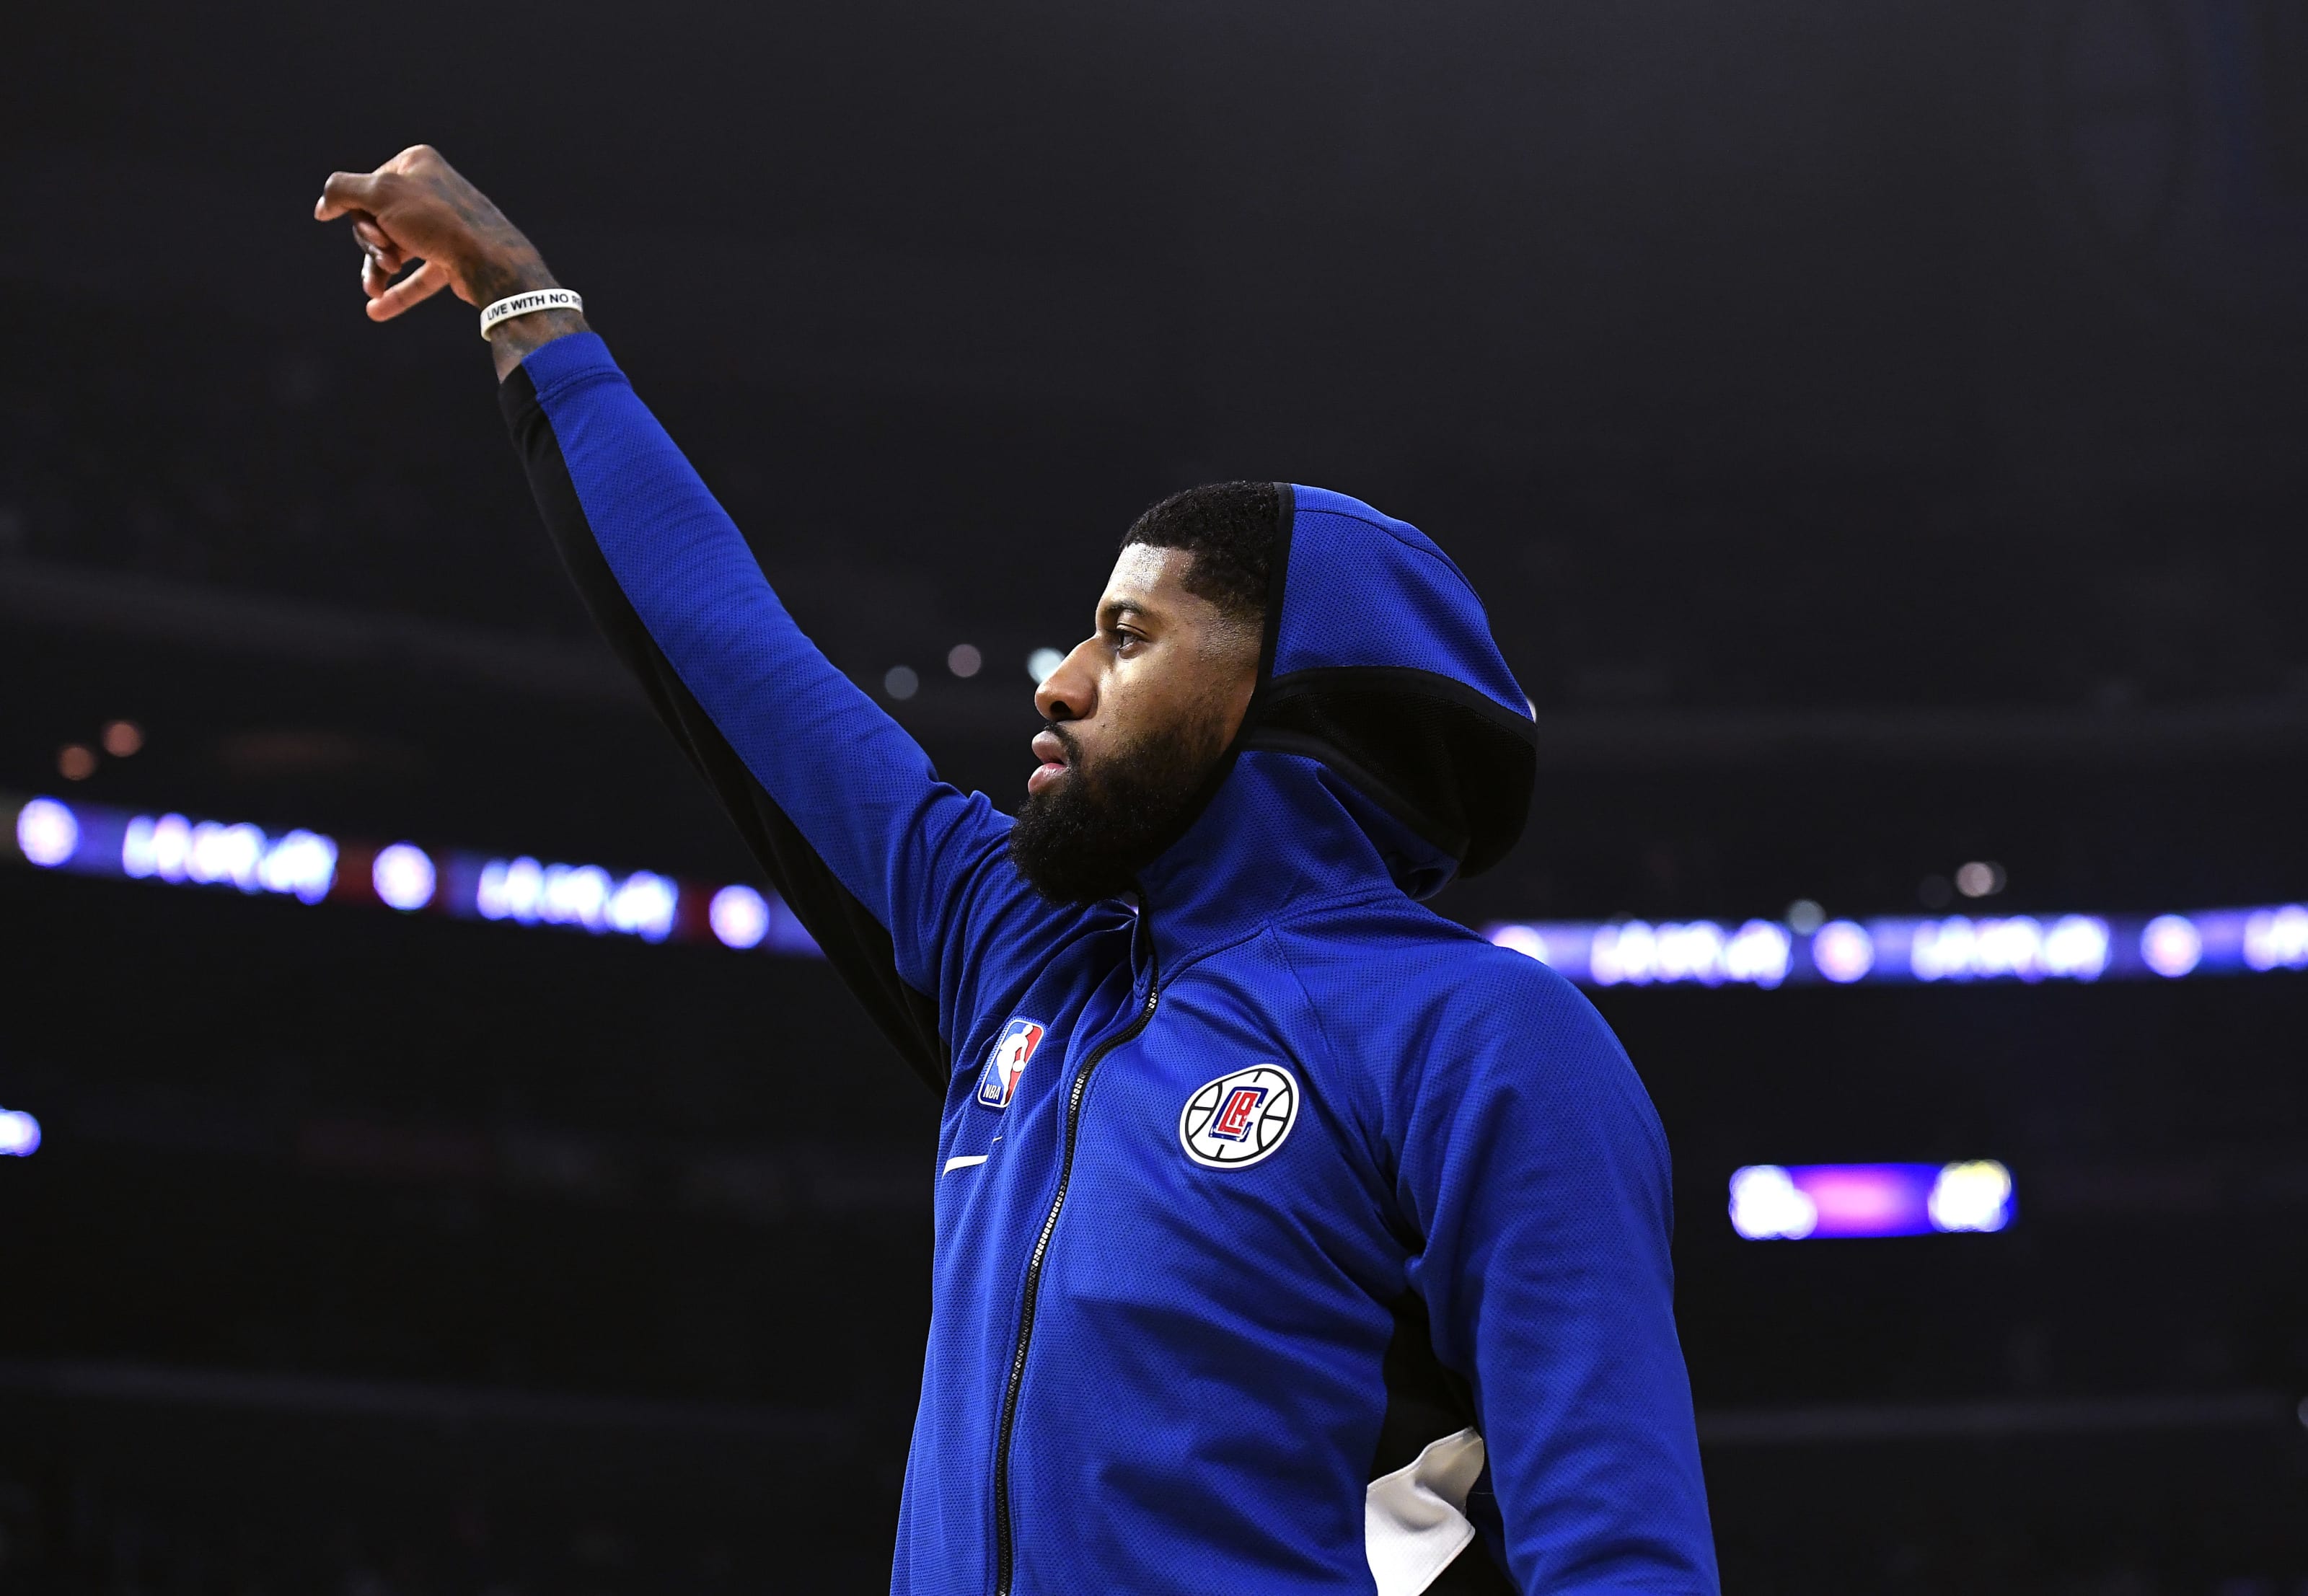 LA Clippers: Paul George's top 3 performances of the season